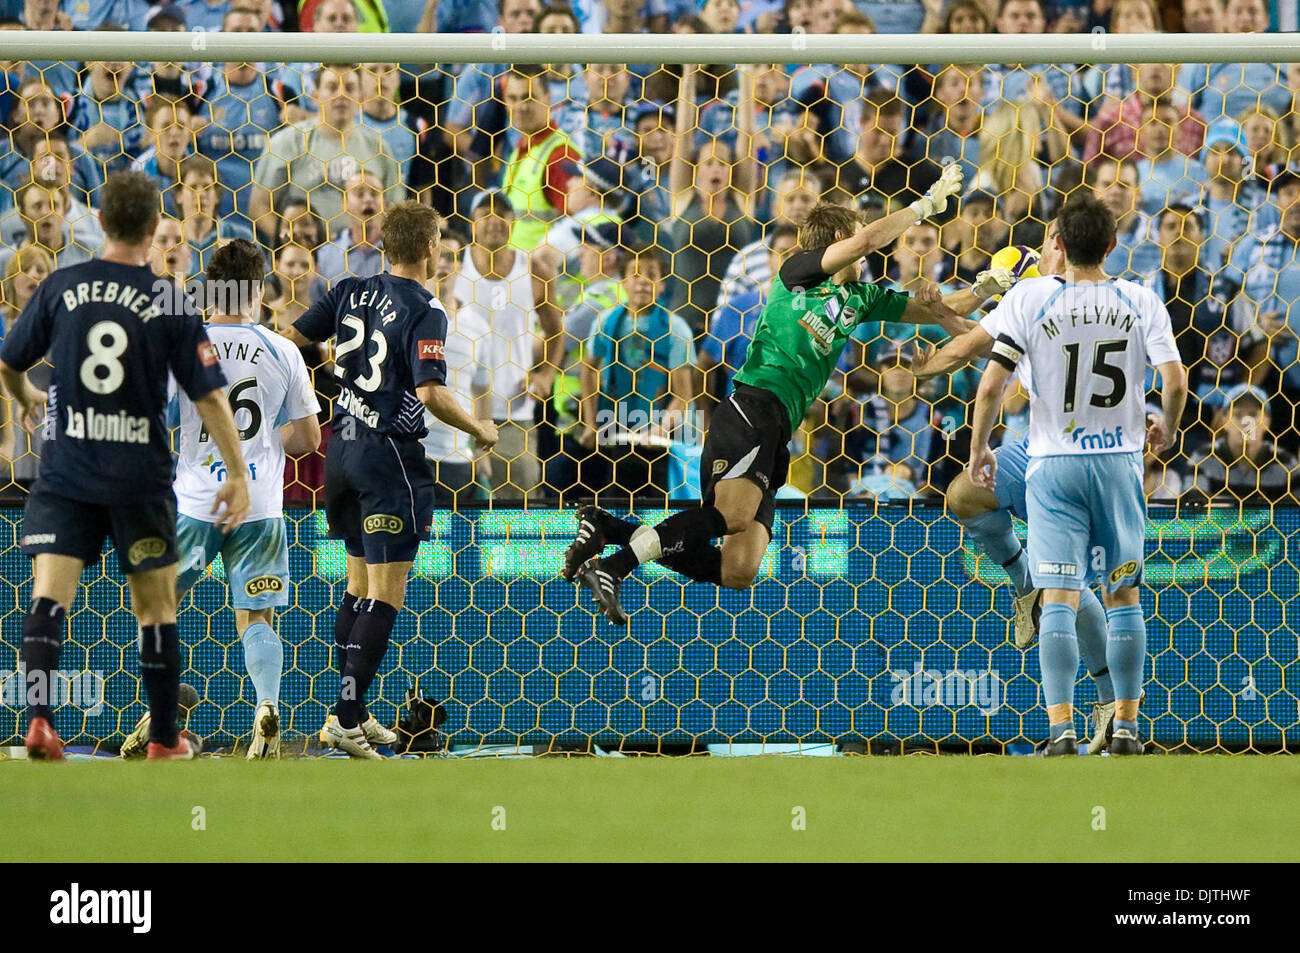 MELBOURNE, AUSTRALIA - MARCH 20, 2010: Mitchell Langerak from Melbourne Victory flies to save a kick from Mark Bridge of Sydney FC in the final of the 2010 A-League between the Melbourne Victory and Sydney FC at Etihad Stadium on March 20, 2010 in Melbourne, Australia. (Credit Image: © Sydney Low/Southcreek Global/ZUMApress.com) Stock Photo